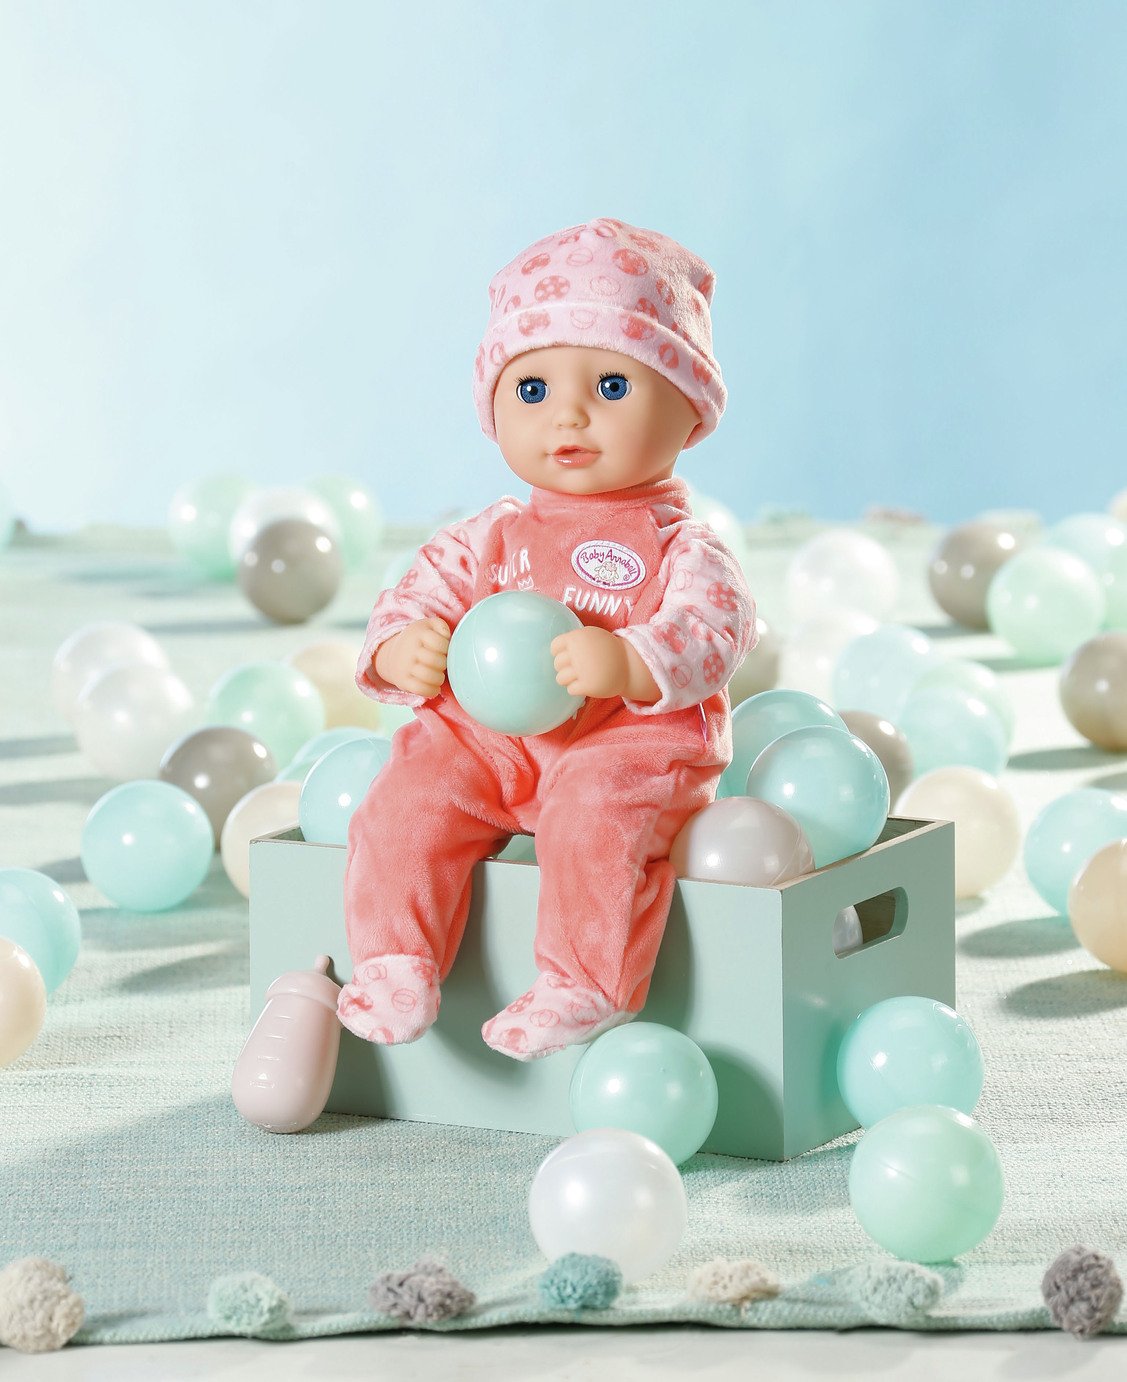 Baby Annabell Little Annabell 36cm Doll Review